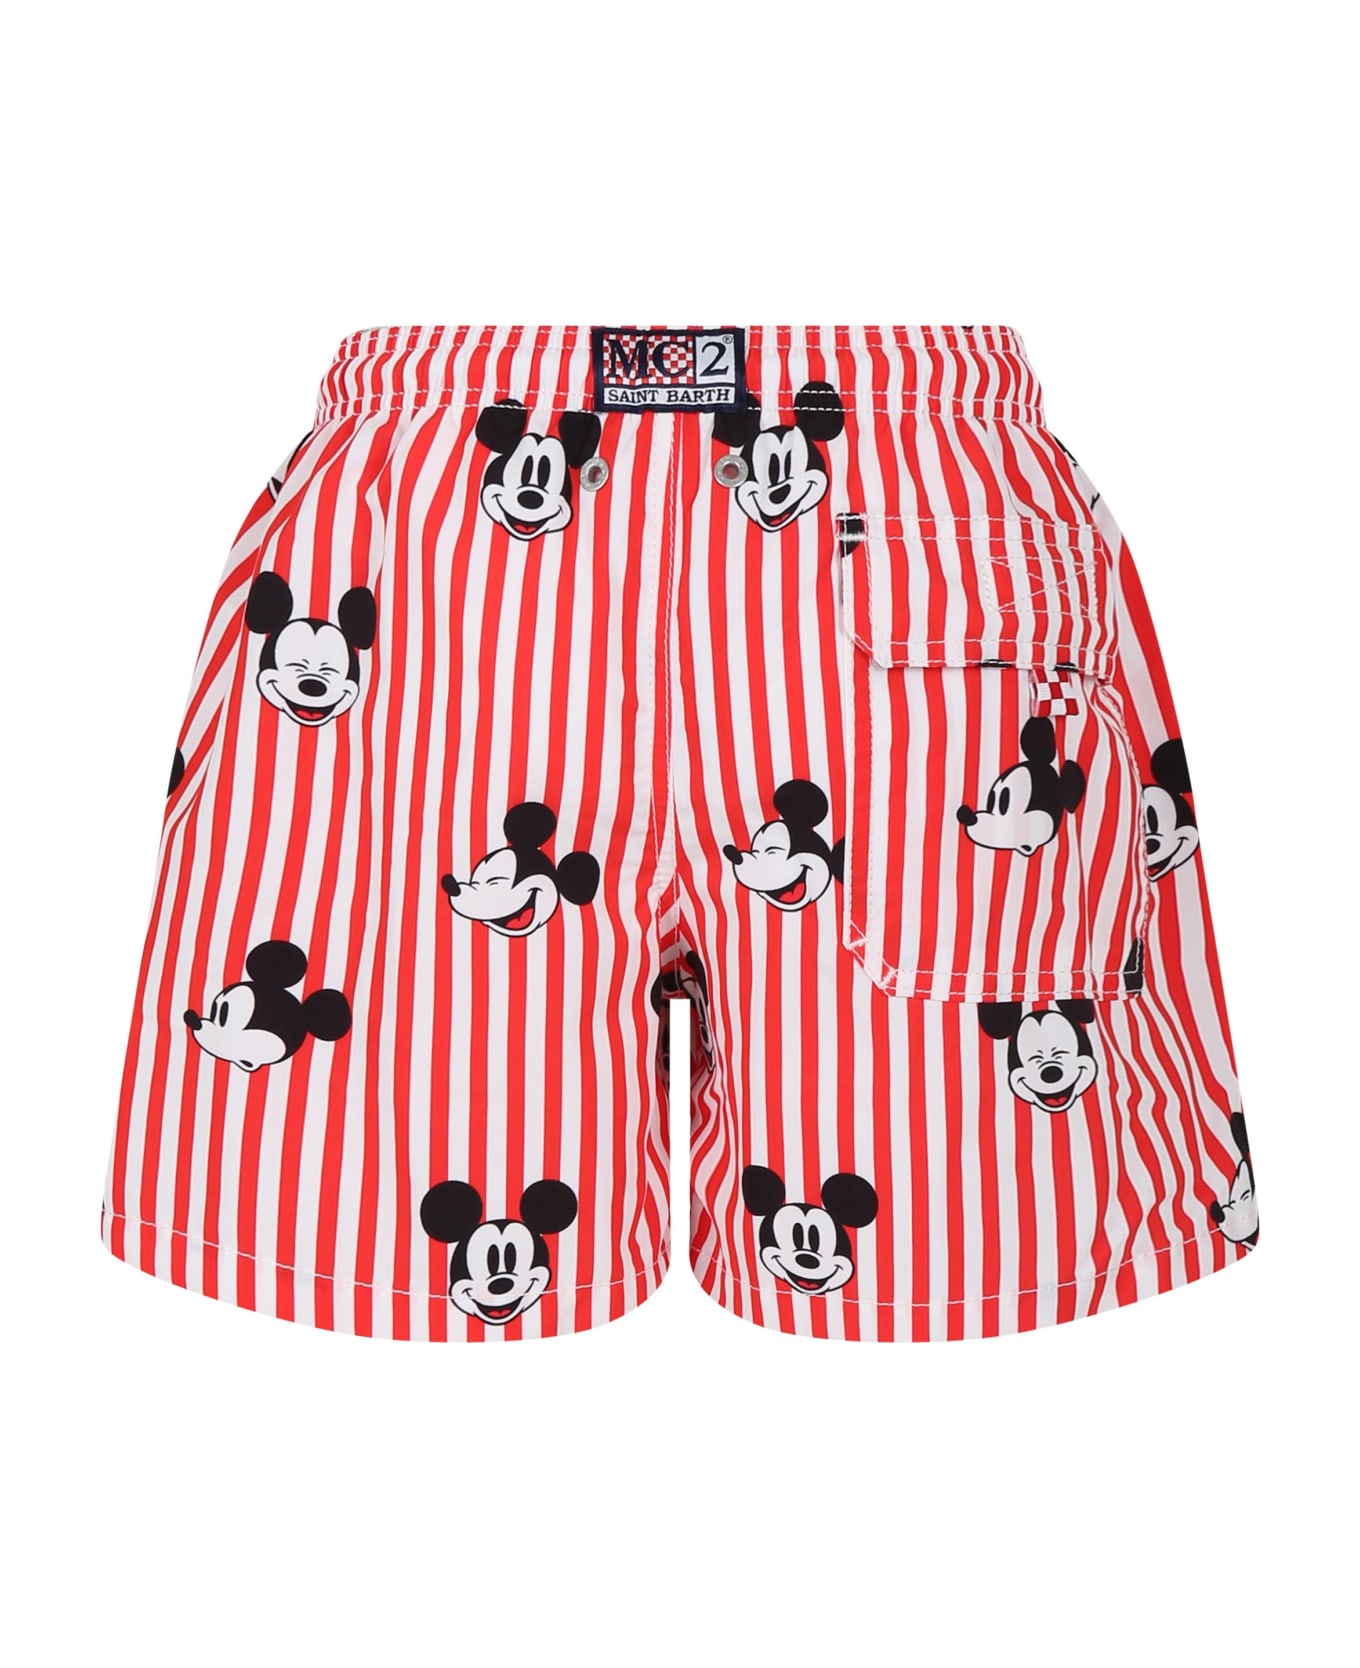 MC2 Saint Barth Red Swim Shorts For Boy With Mickey Mouse Print And Logo - Red